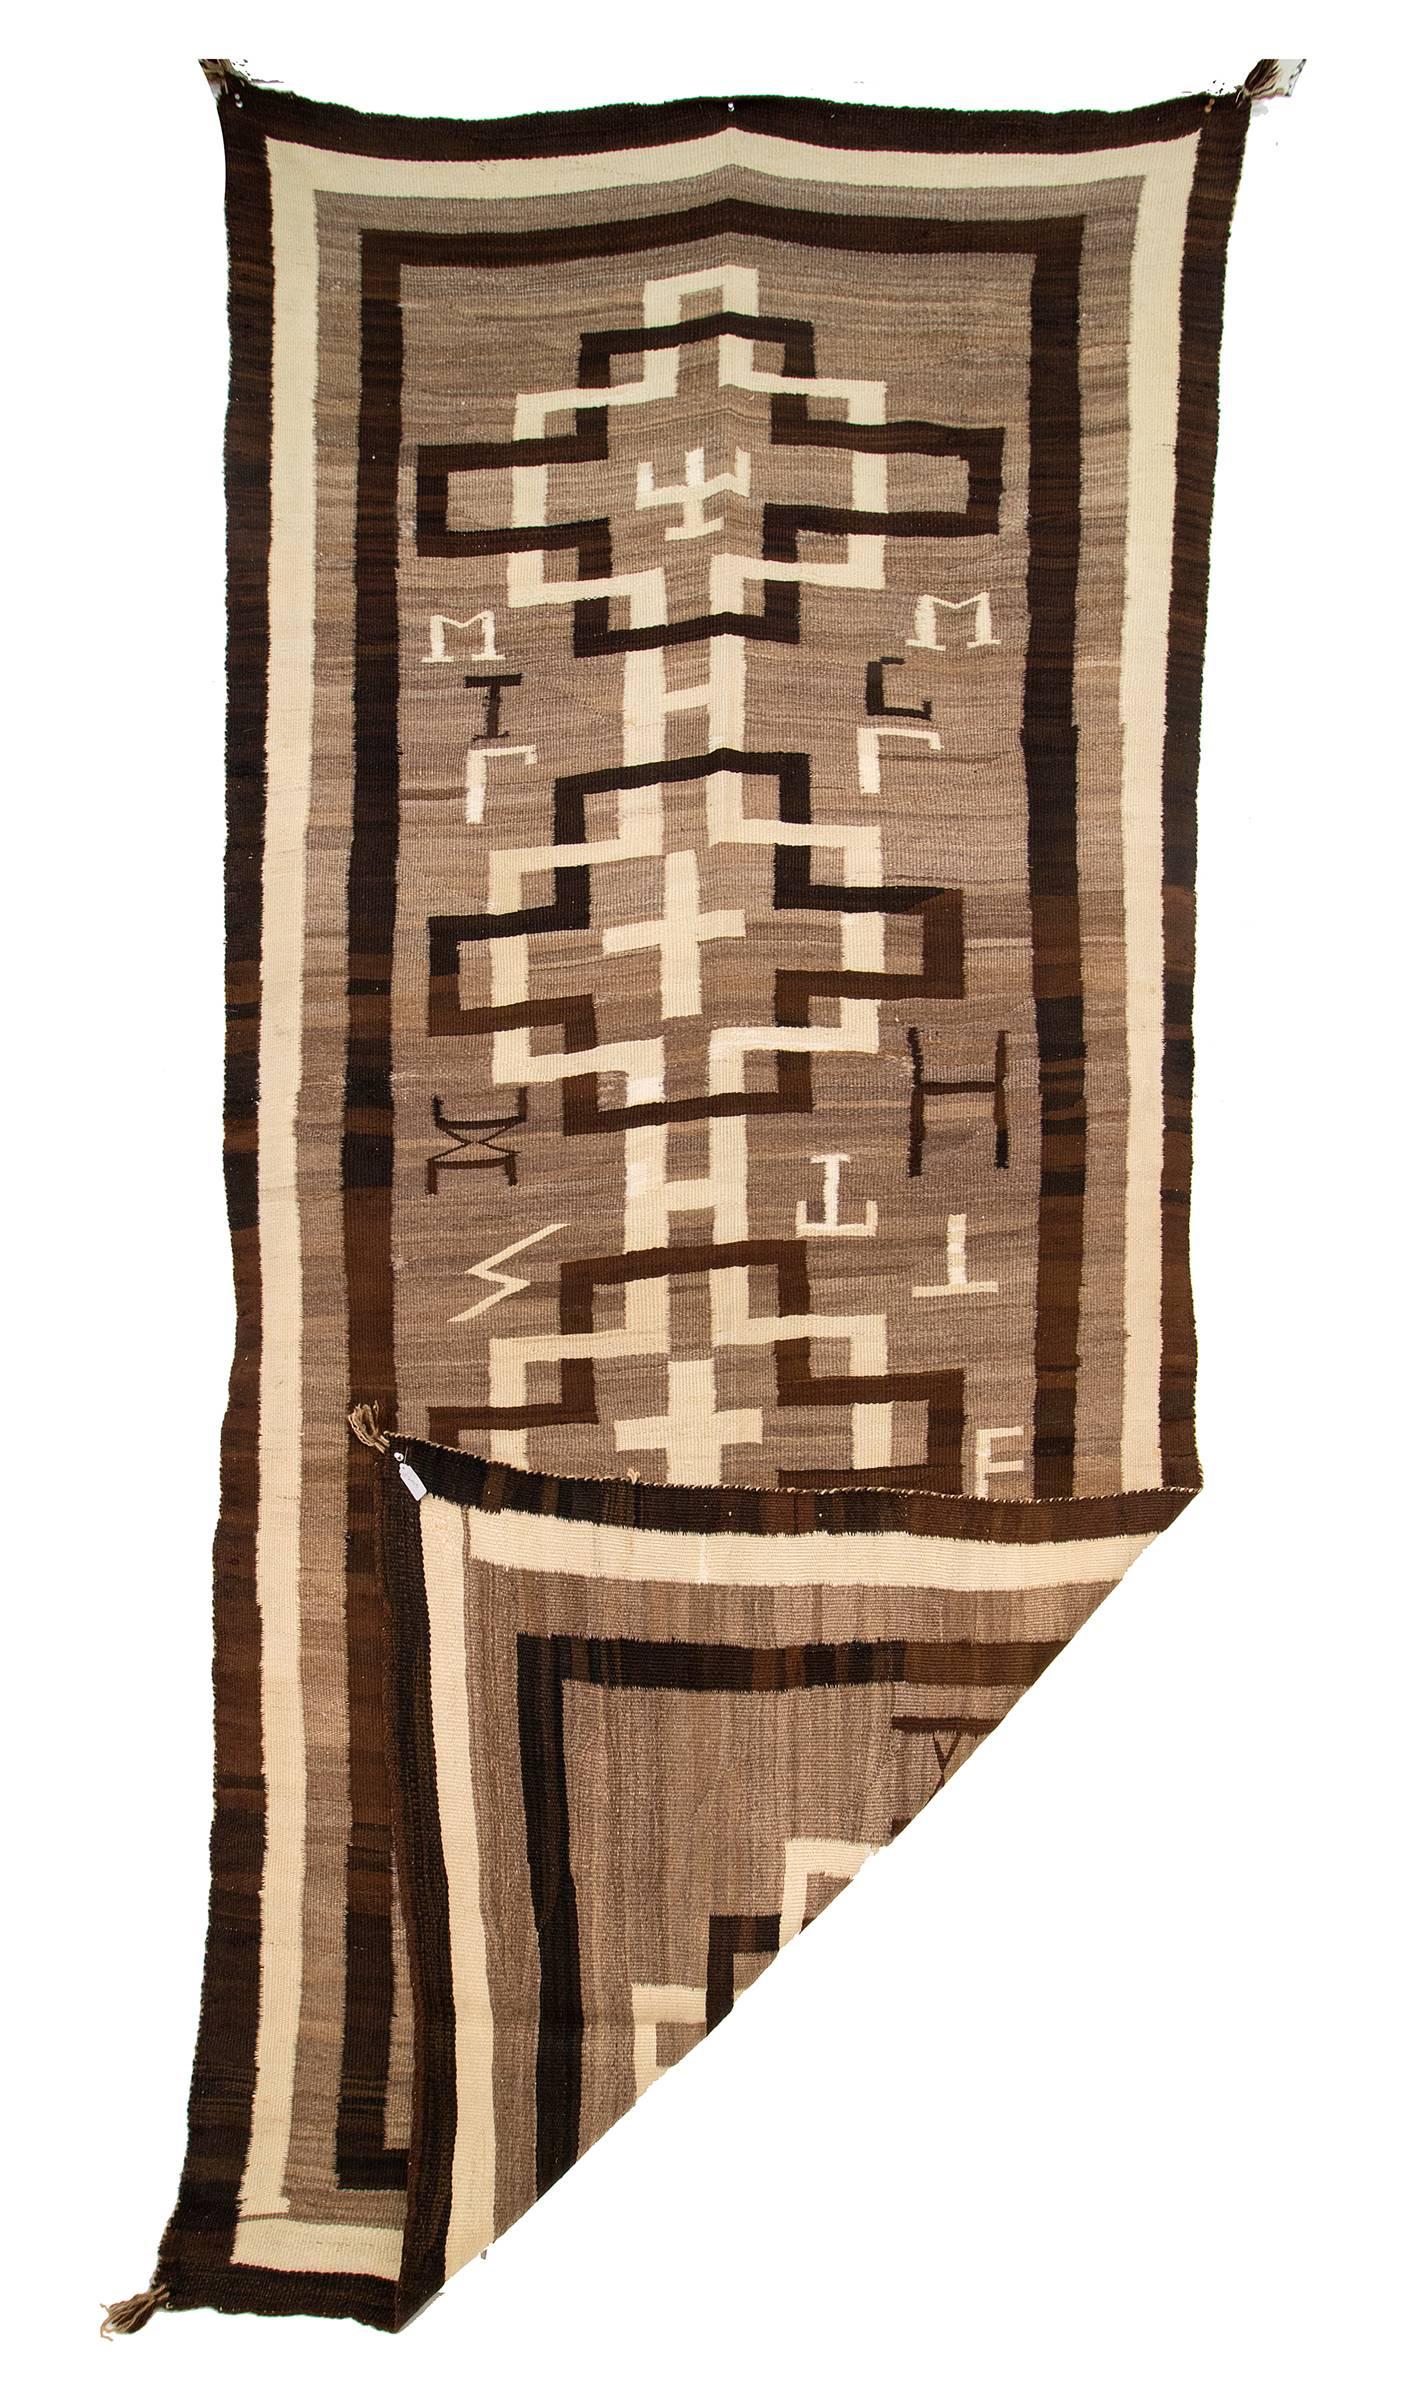 An elongated runner textile woven of native hand-spun in natural fleece colors of ivory, brown and brown/black. 

Well suited for use as an area rug, wall hanging or furniture covering/throw.